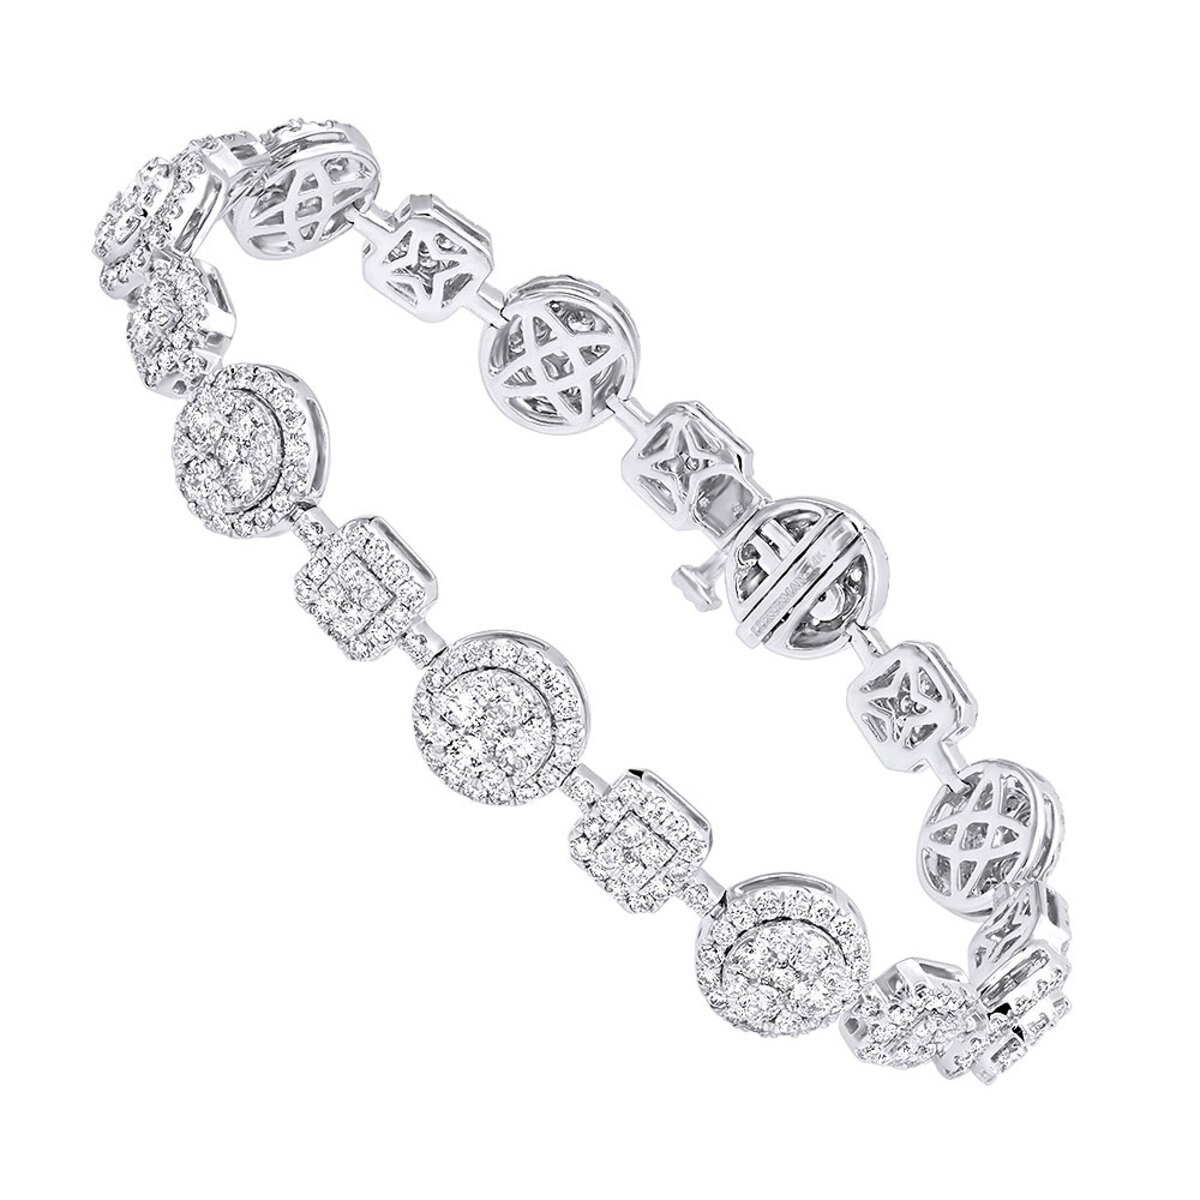 Womens diamond bracelets, when it comes to accessorizing with women's diamond bracelets, the key is to strike a balance between